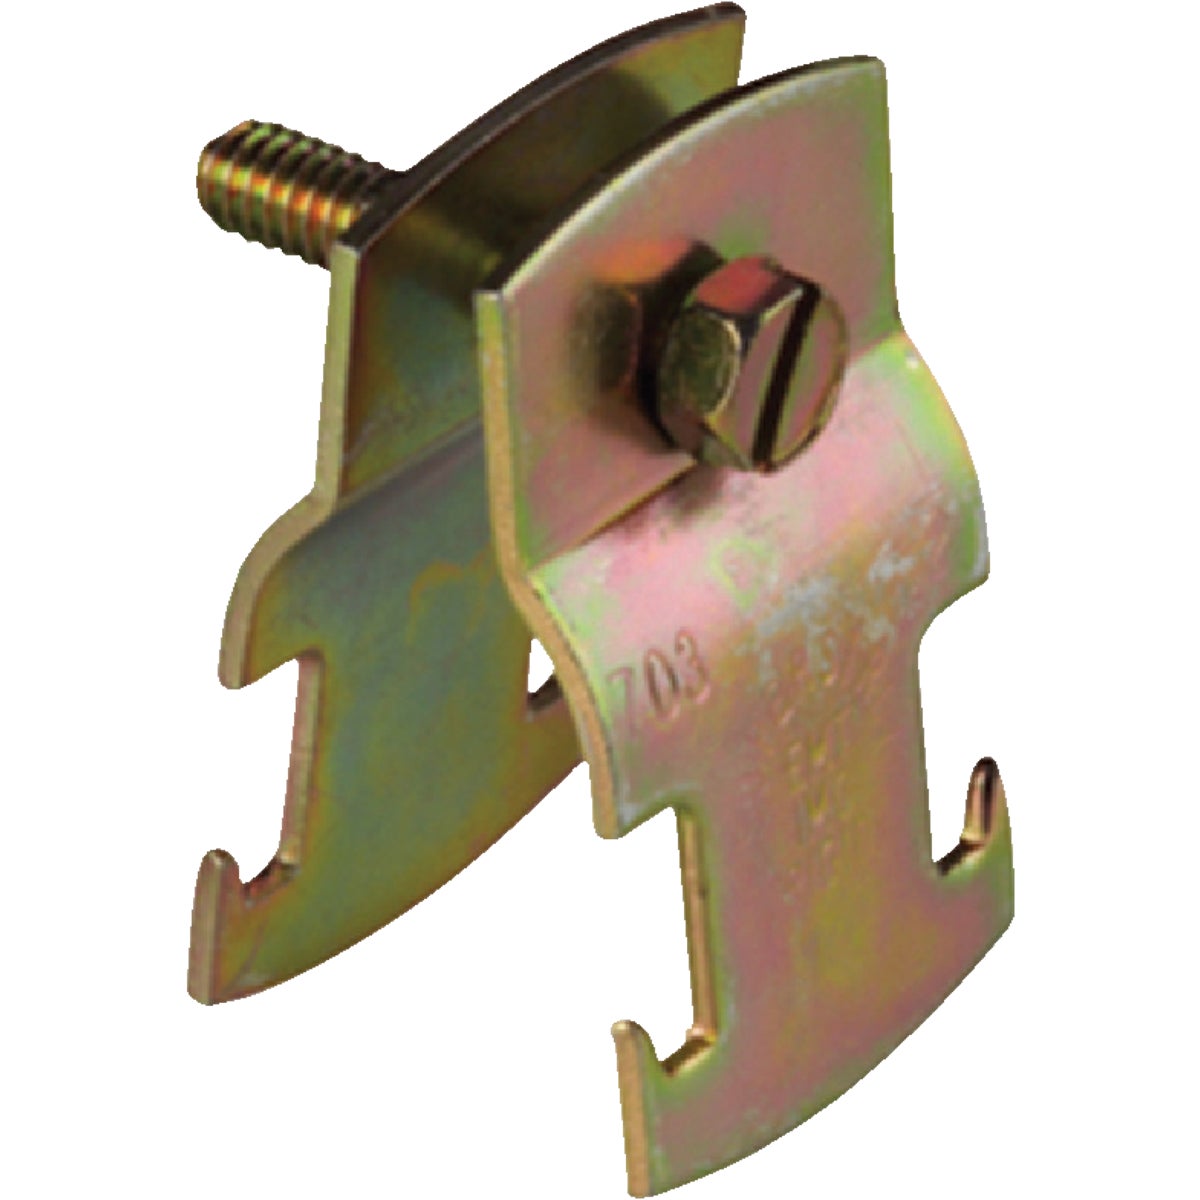 Superstrut 1-1/4 In. Gold Galvanized Electroplated Zinc Universal Pipe Clamp